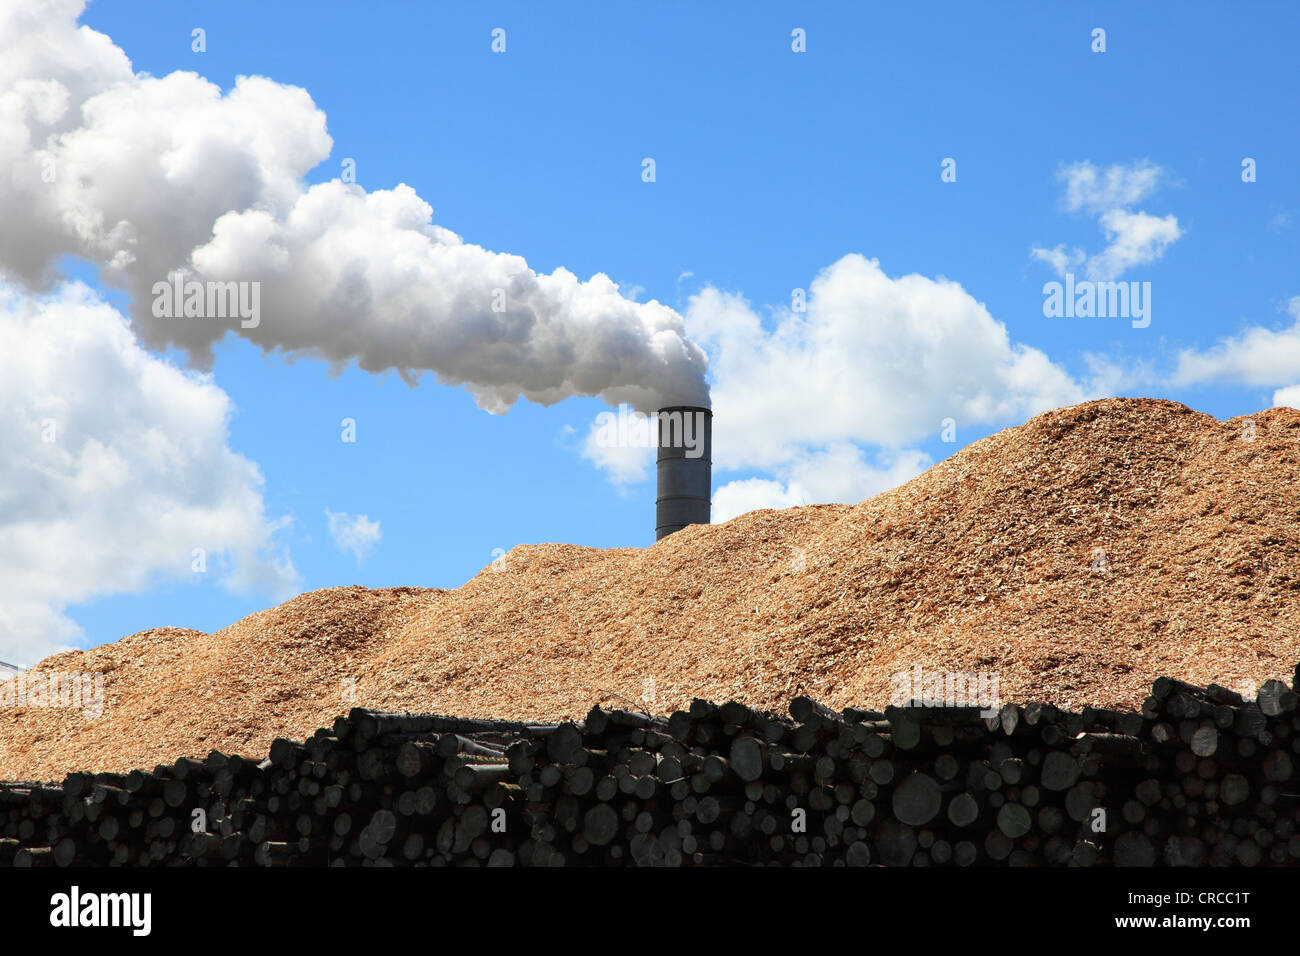 Billowing exhaust from a chimney above a large heap of wood chippings Egger chipboard factory Hexham Northumberland England UK Stock Photo